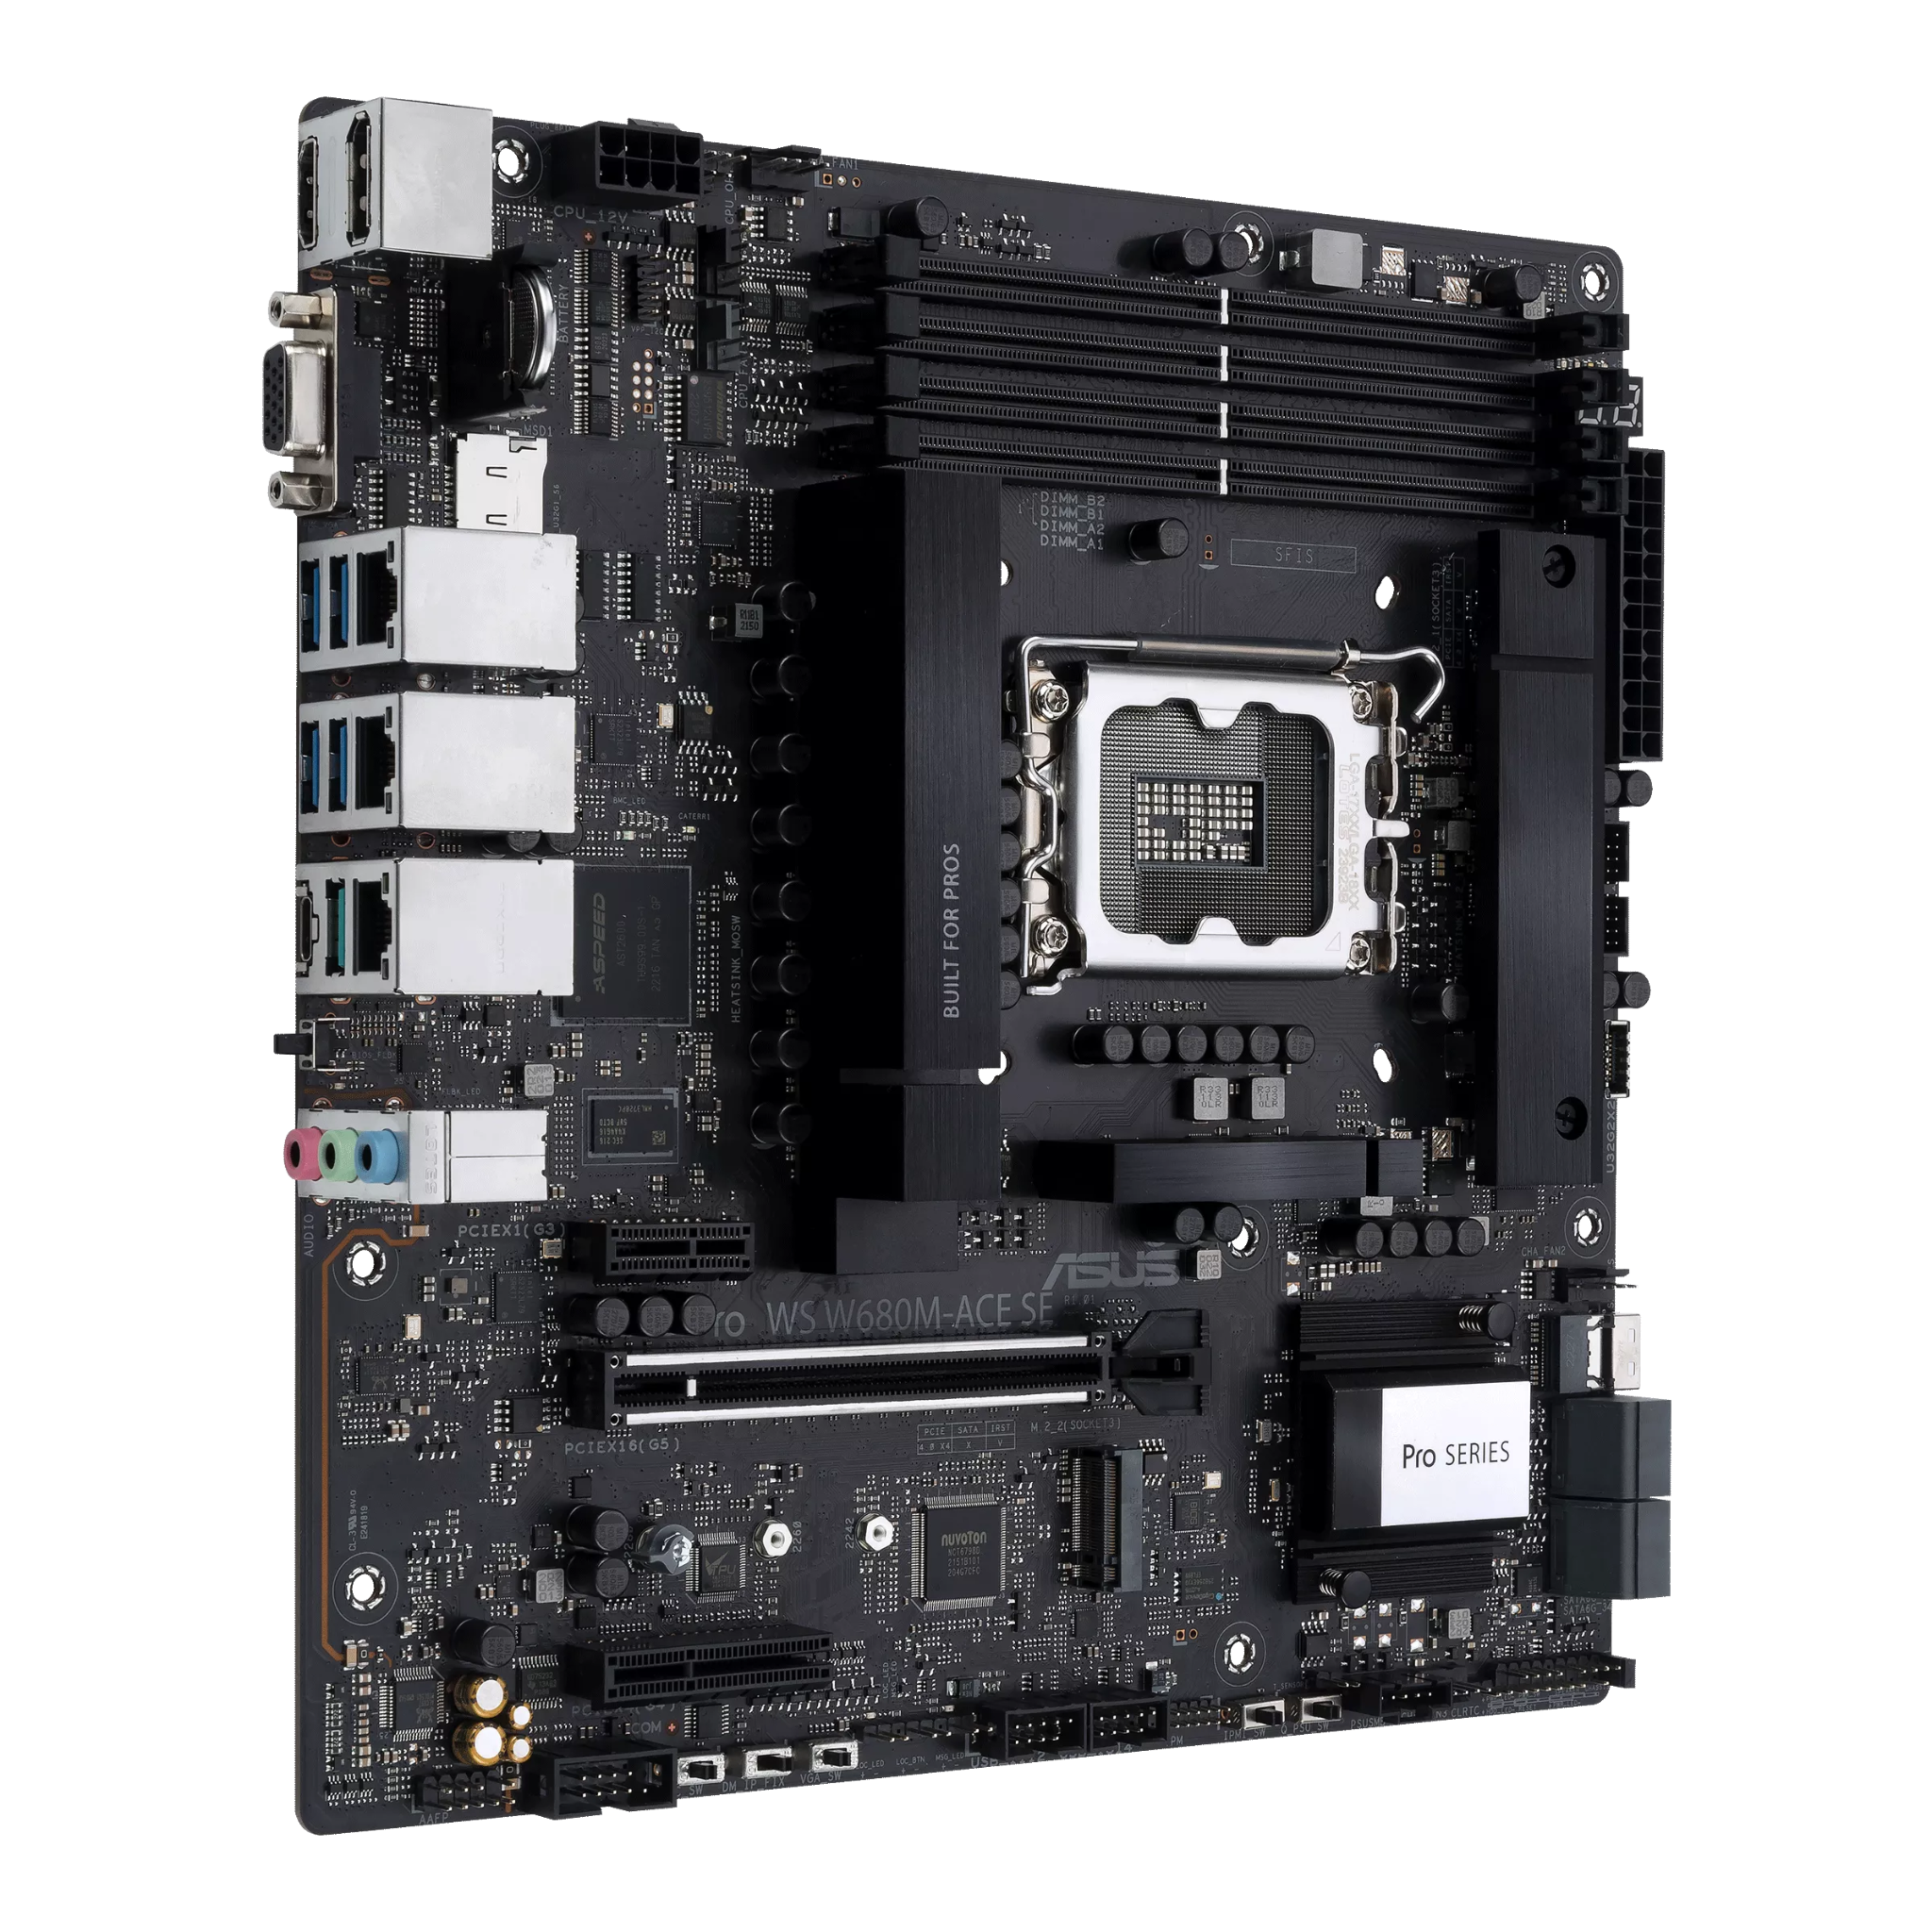 Mainboard ASUS Pro WS W680M-ACE SE